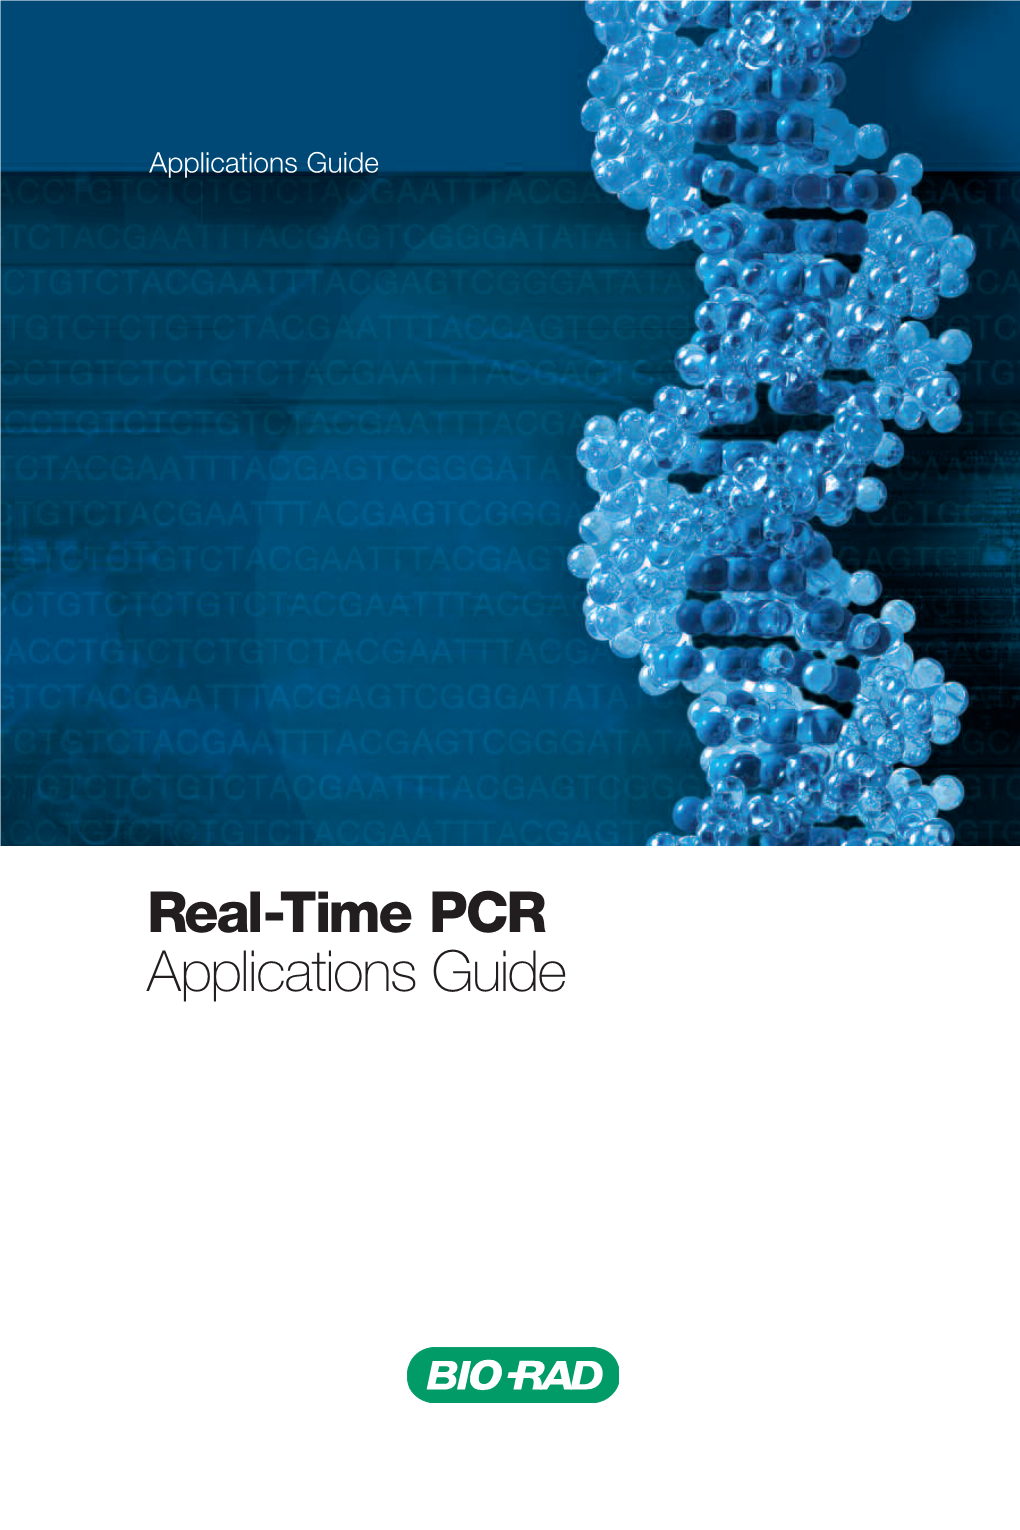 Real-Time PCR Applications Guide